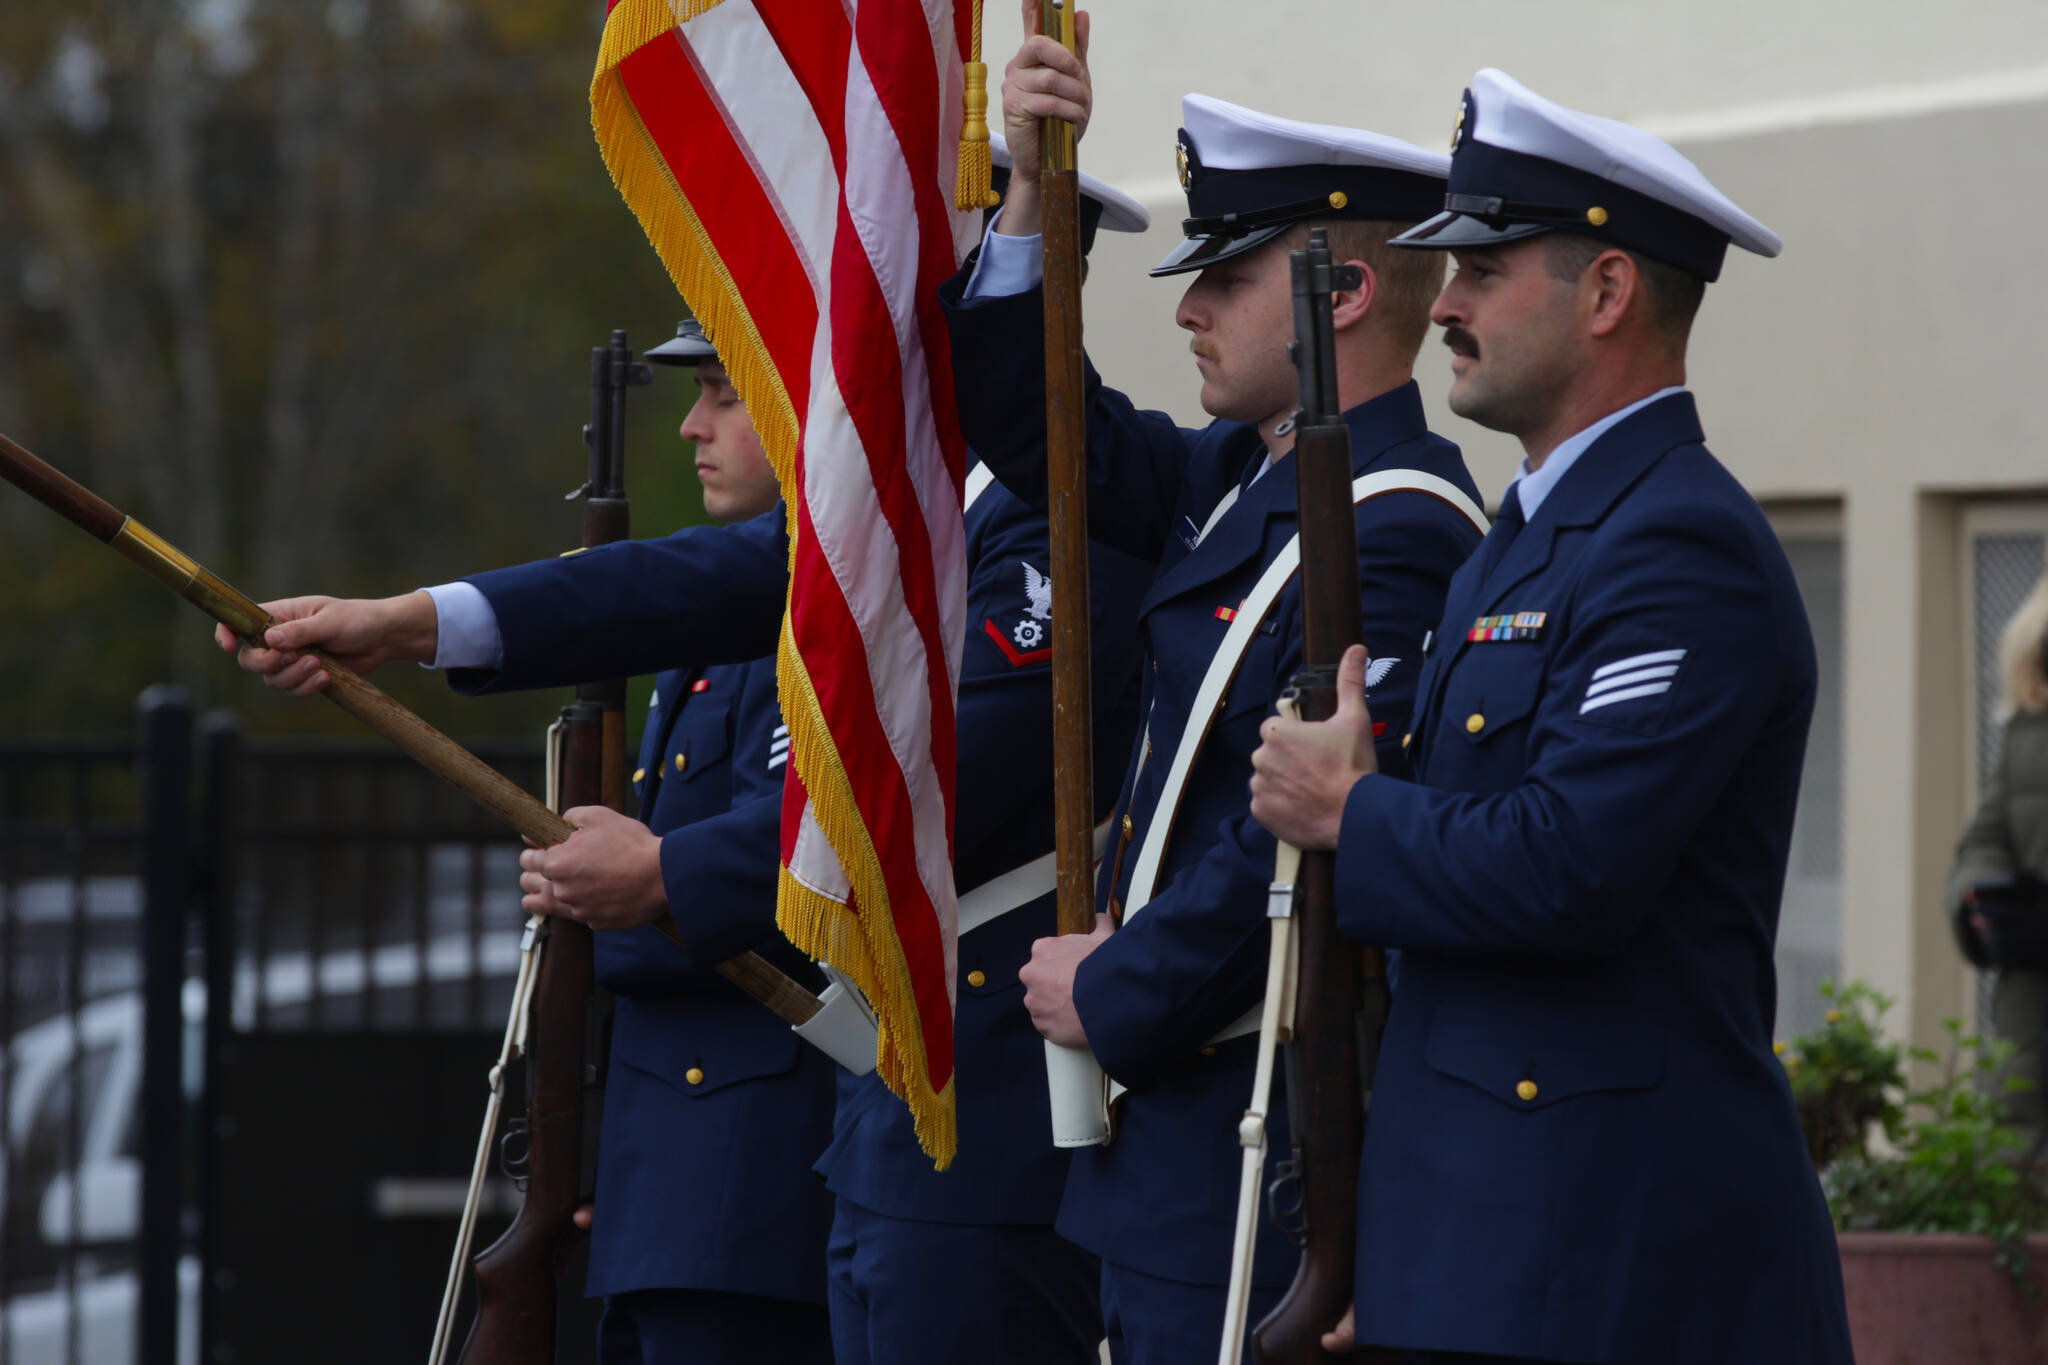 Michael S. Lockett / The Daily World 
A Coast Guard color guard from Coast Guard Station Westport presents the colors during a Veterans Day ceremony at St. Mary School on Nov. 10.